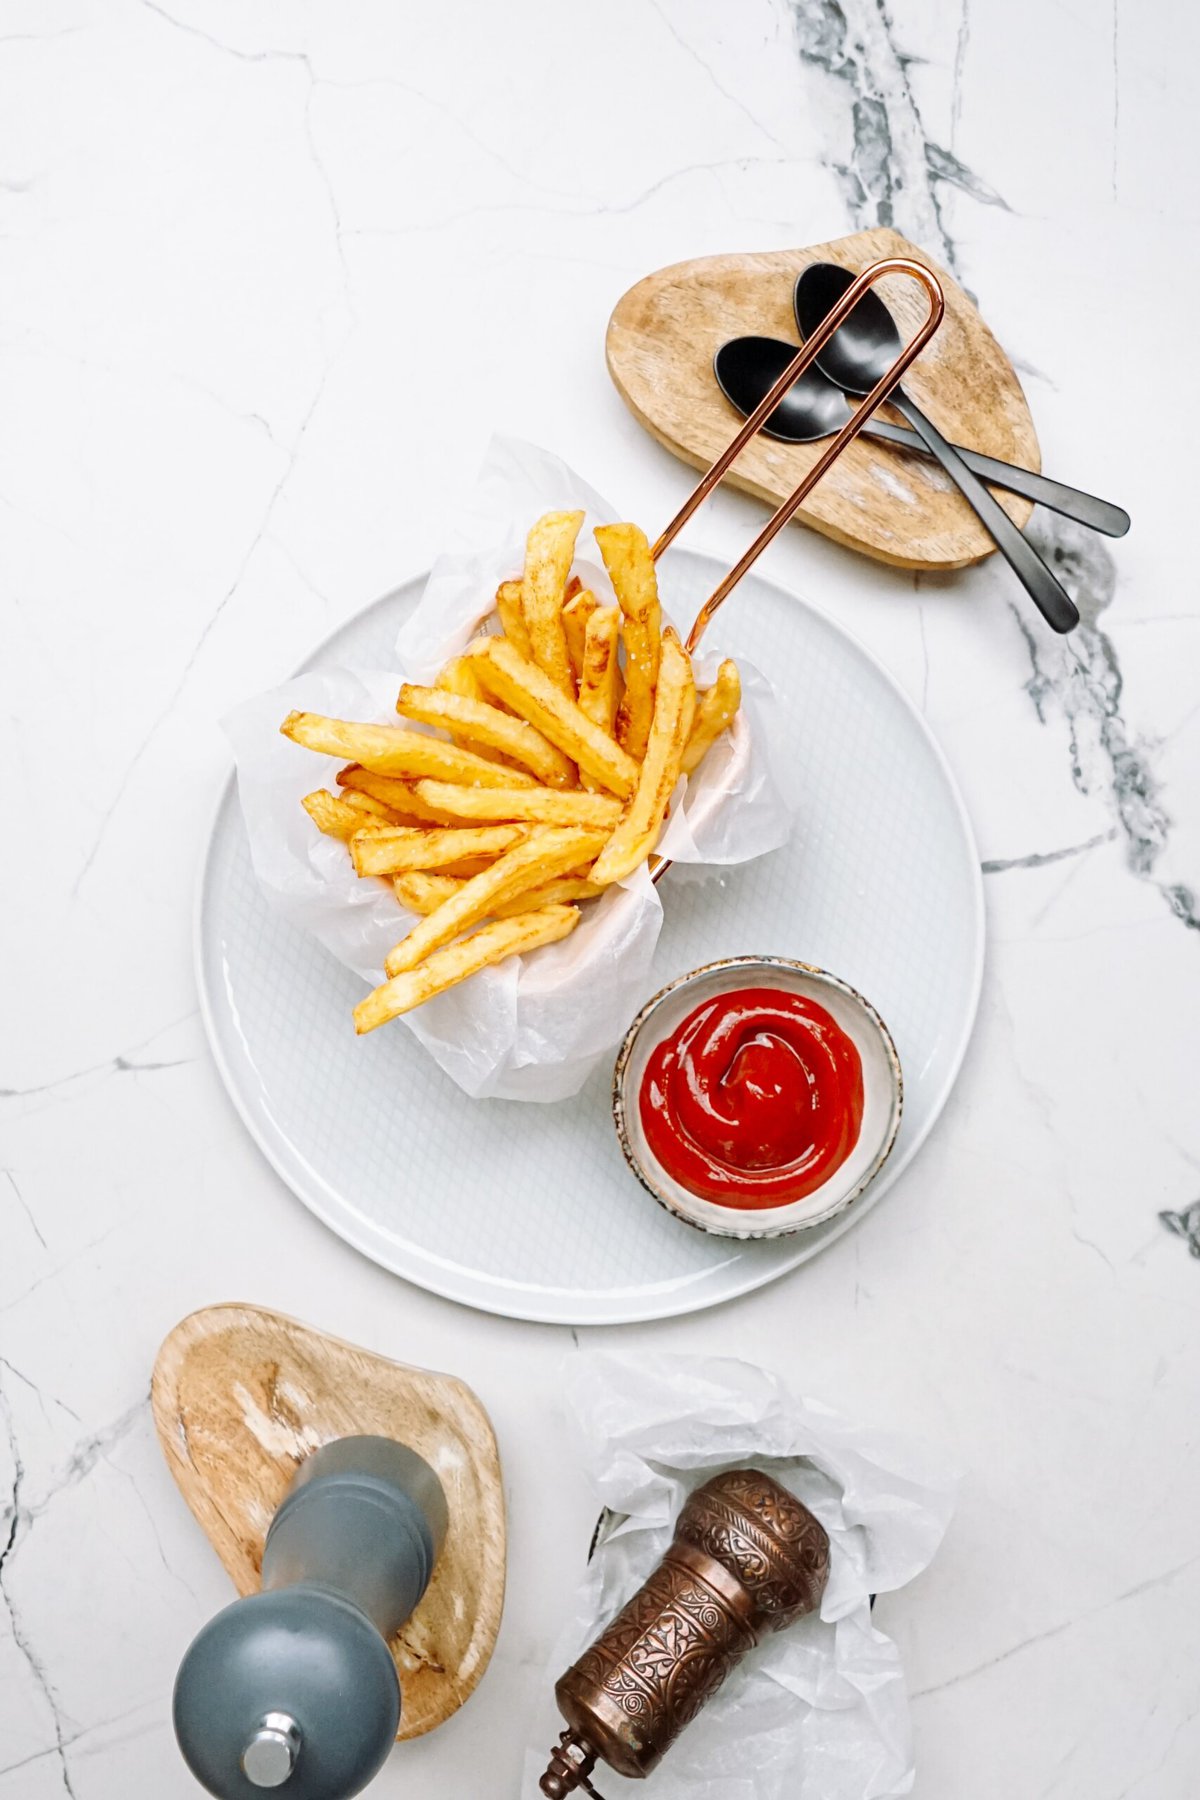 pomme frites arranged on a plate with a little cup of ketchup on a tablescape